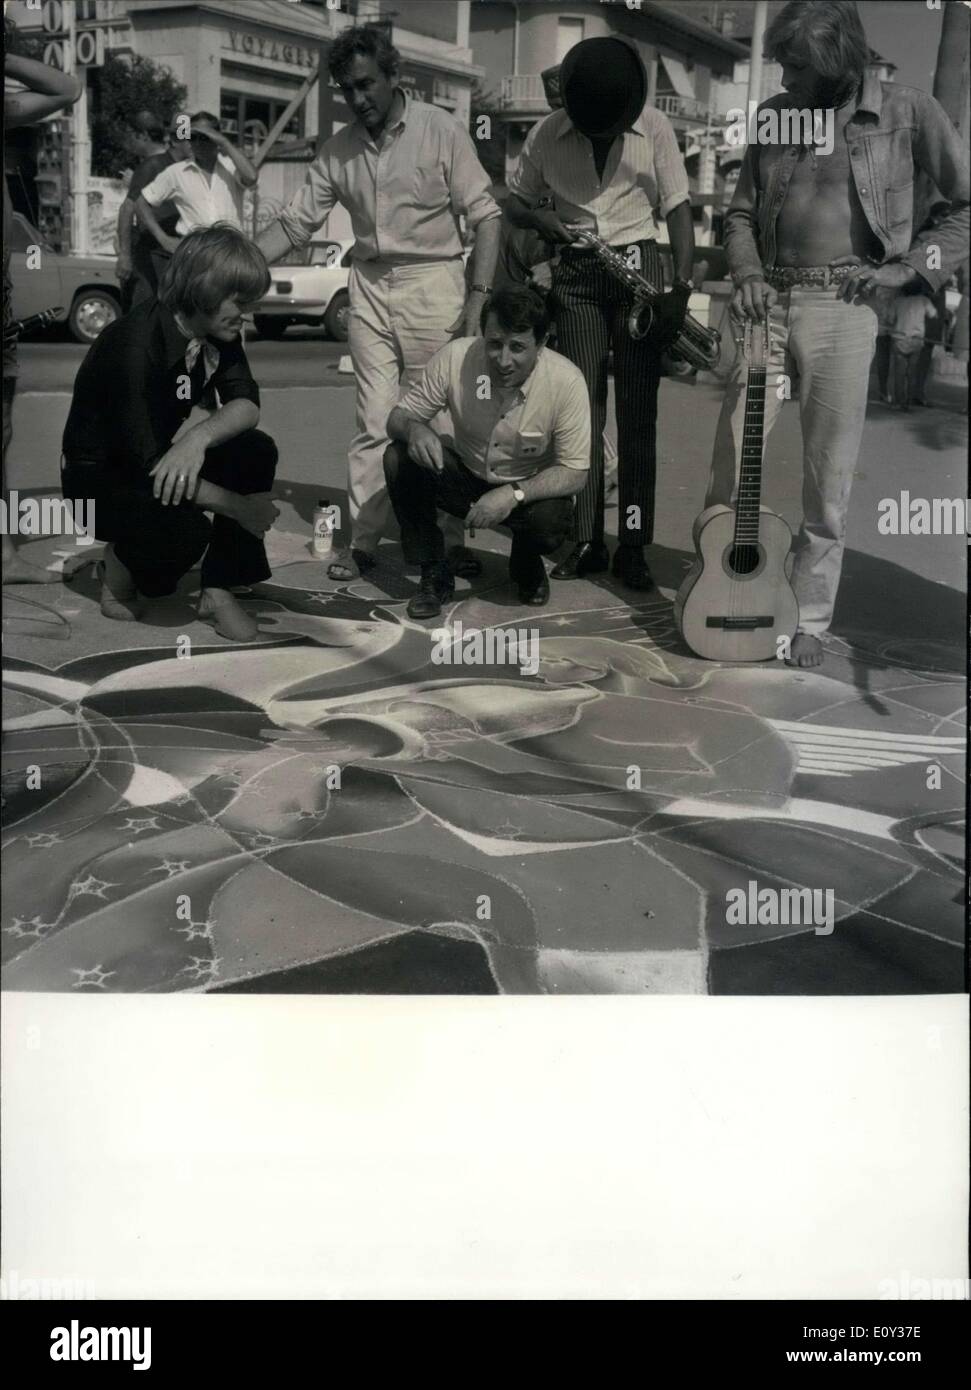 Sep. 14, 1968 - Surrounded by Beatniks and Hippies, Raymond Moretti draws on the sidewalk. A renowned artist, he abandoned his luxury studio to paint on the sidewalk. Stock Photo